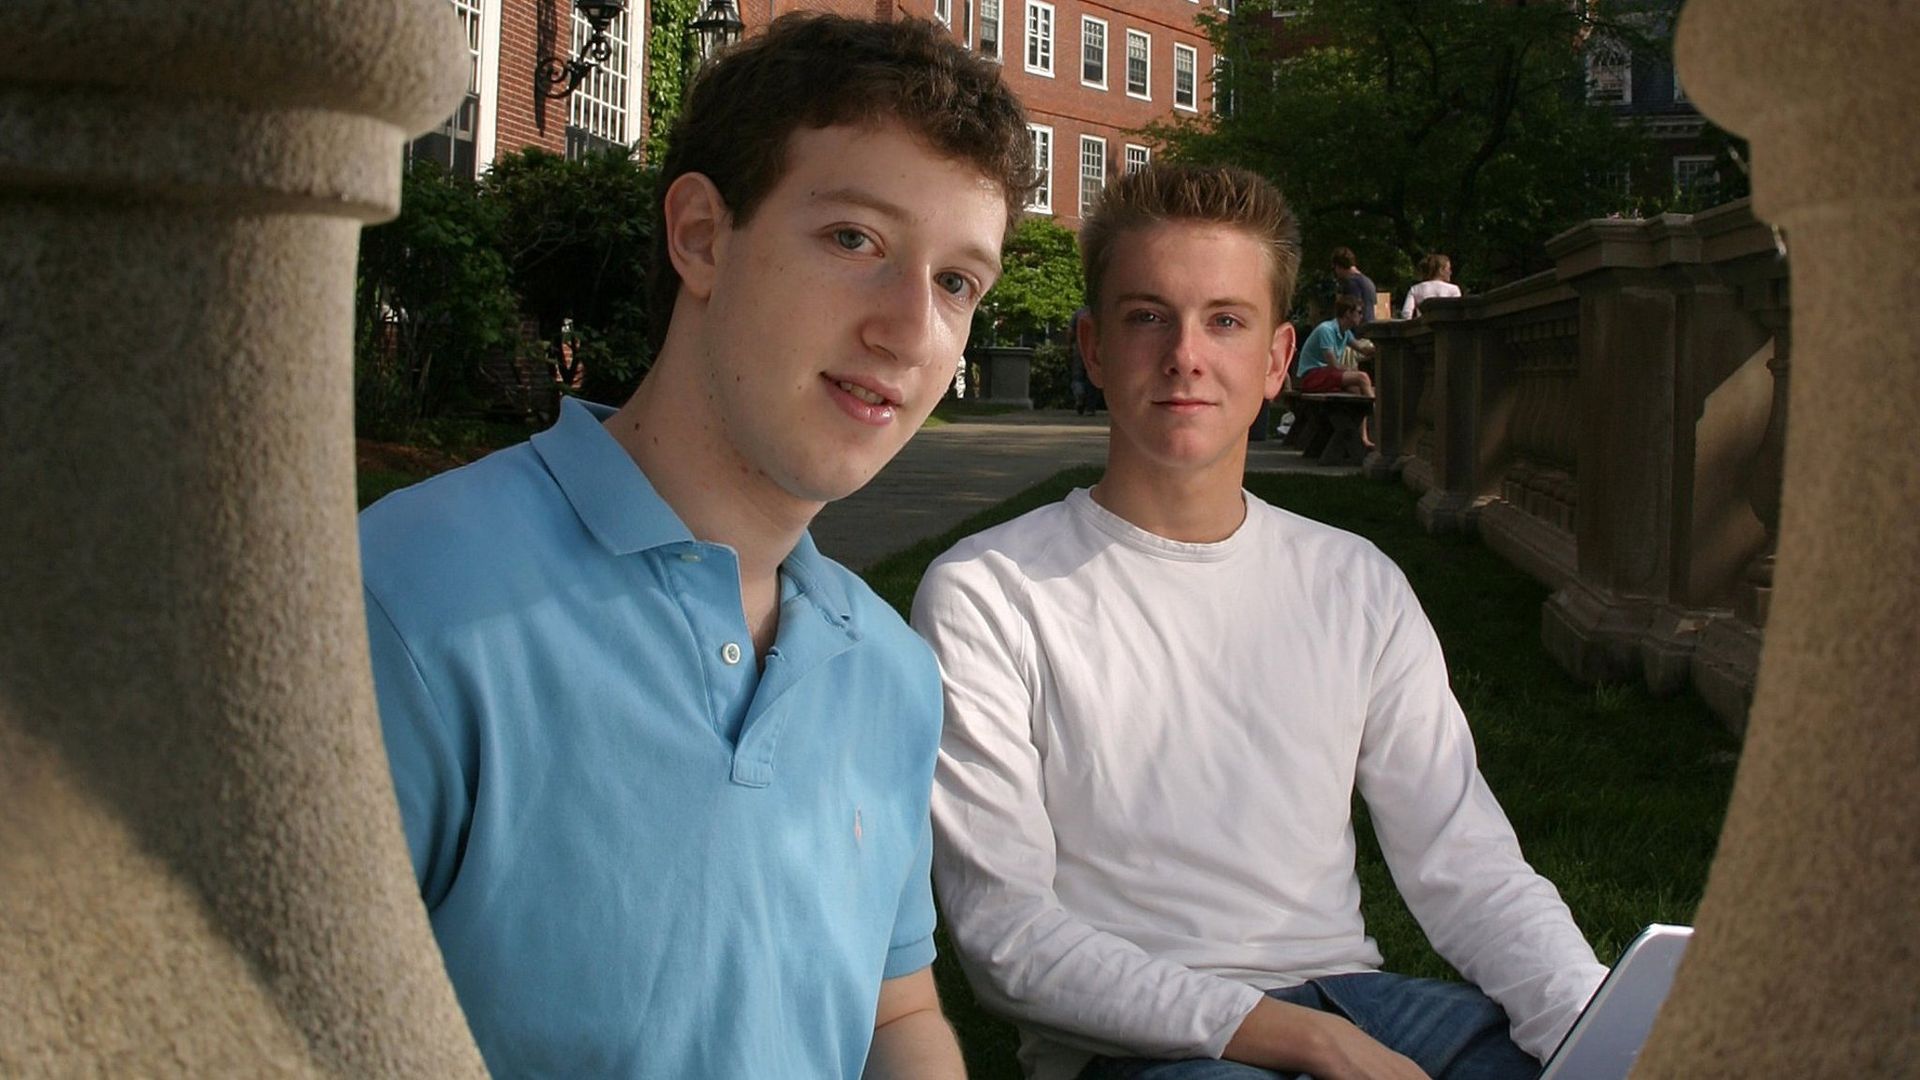 In this image, a young college aged Mark Zuckerberg sits in a polo shirt next to Chris Hughes.